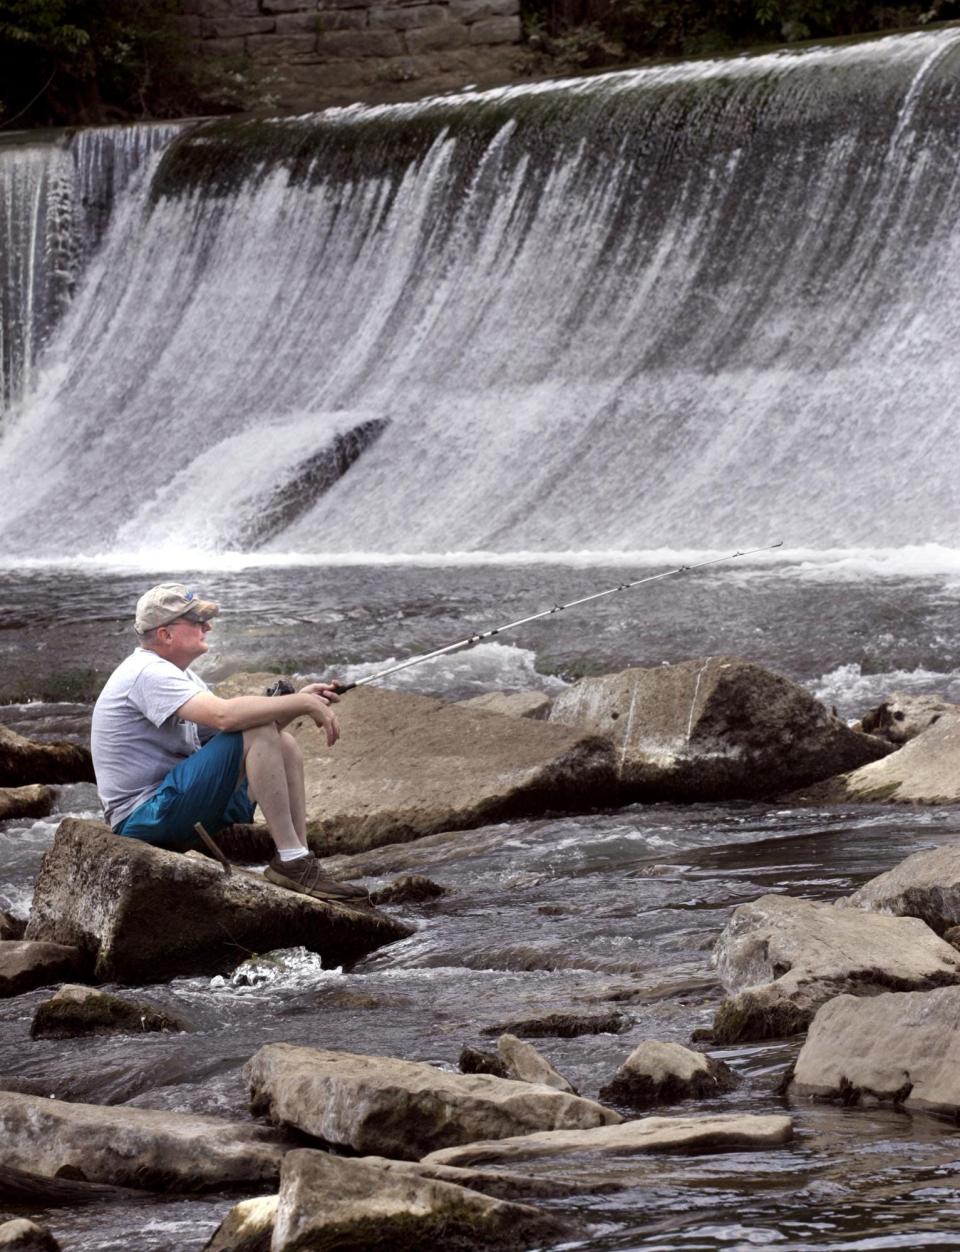 Dave McCann fishes in the East Fork of the Stones River under the Walter Hill Dam.